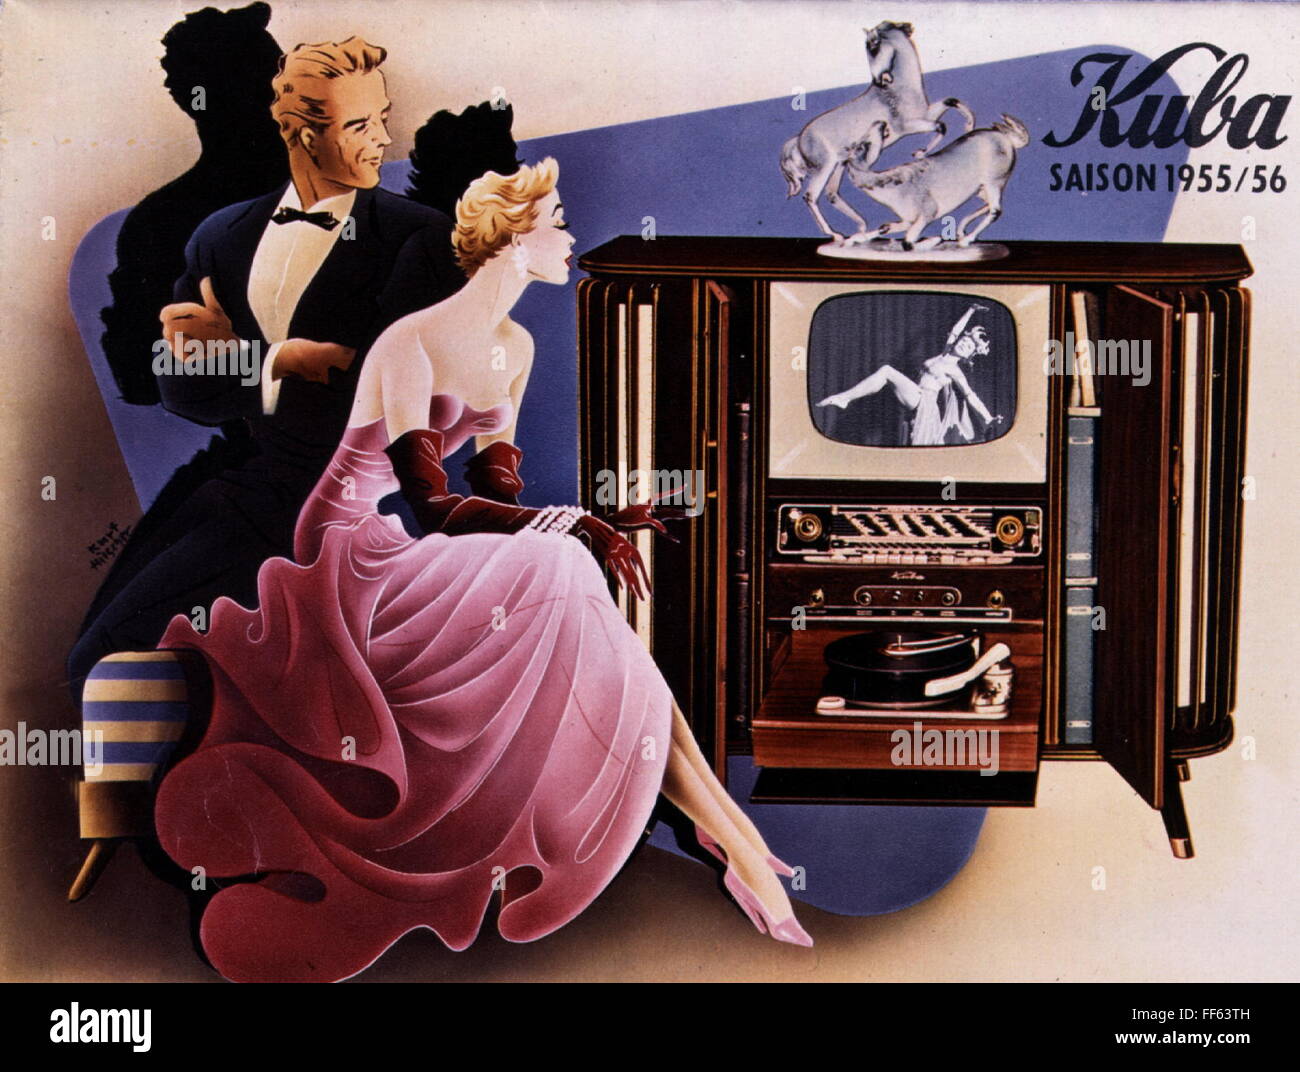 broadcast, television, couple watching TV, television radio phono chest by Kuba, advertsing brochure, Germany, 1955/1956, Additional-Rights-Clearences-Not Available Stock Photo